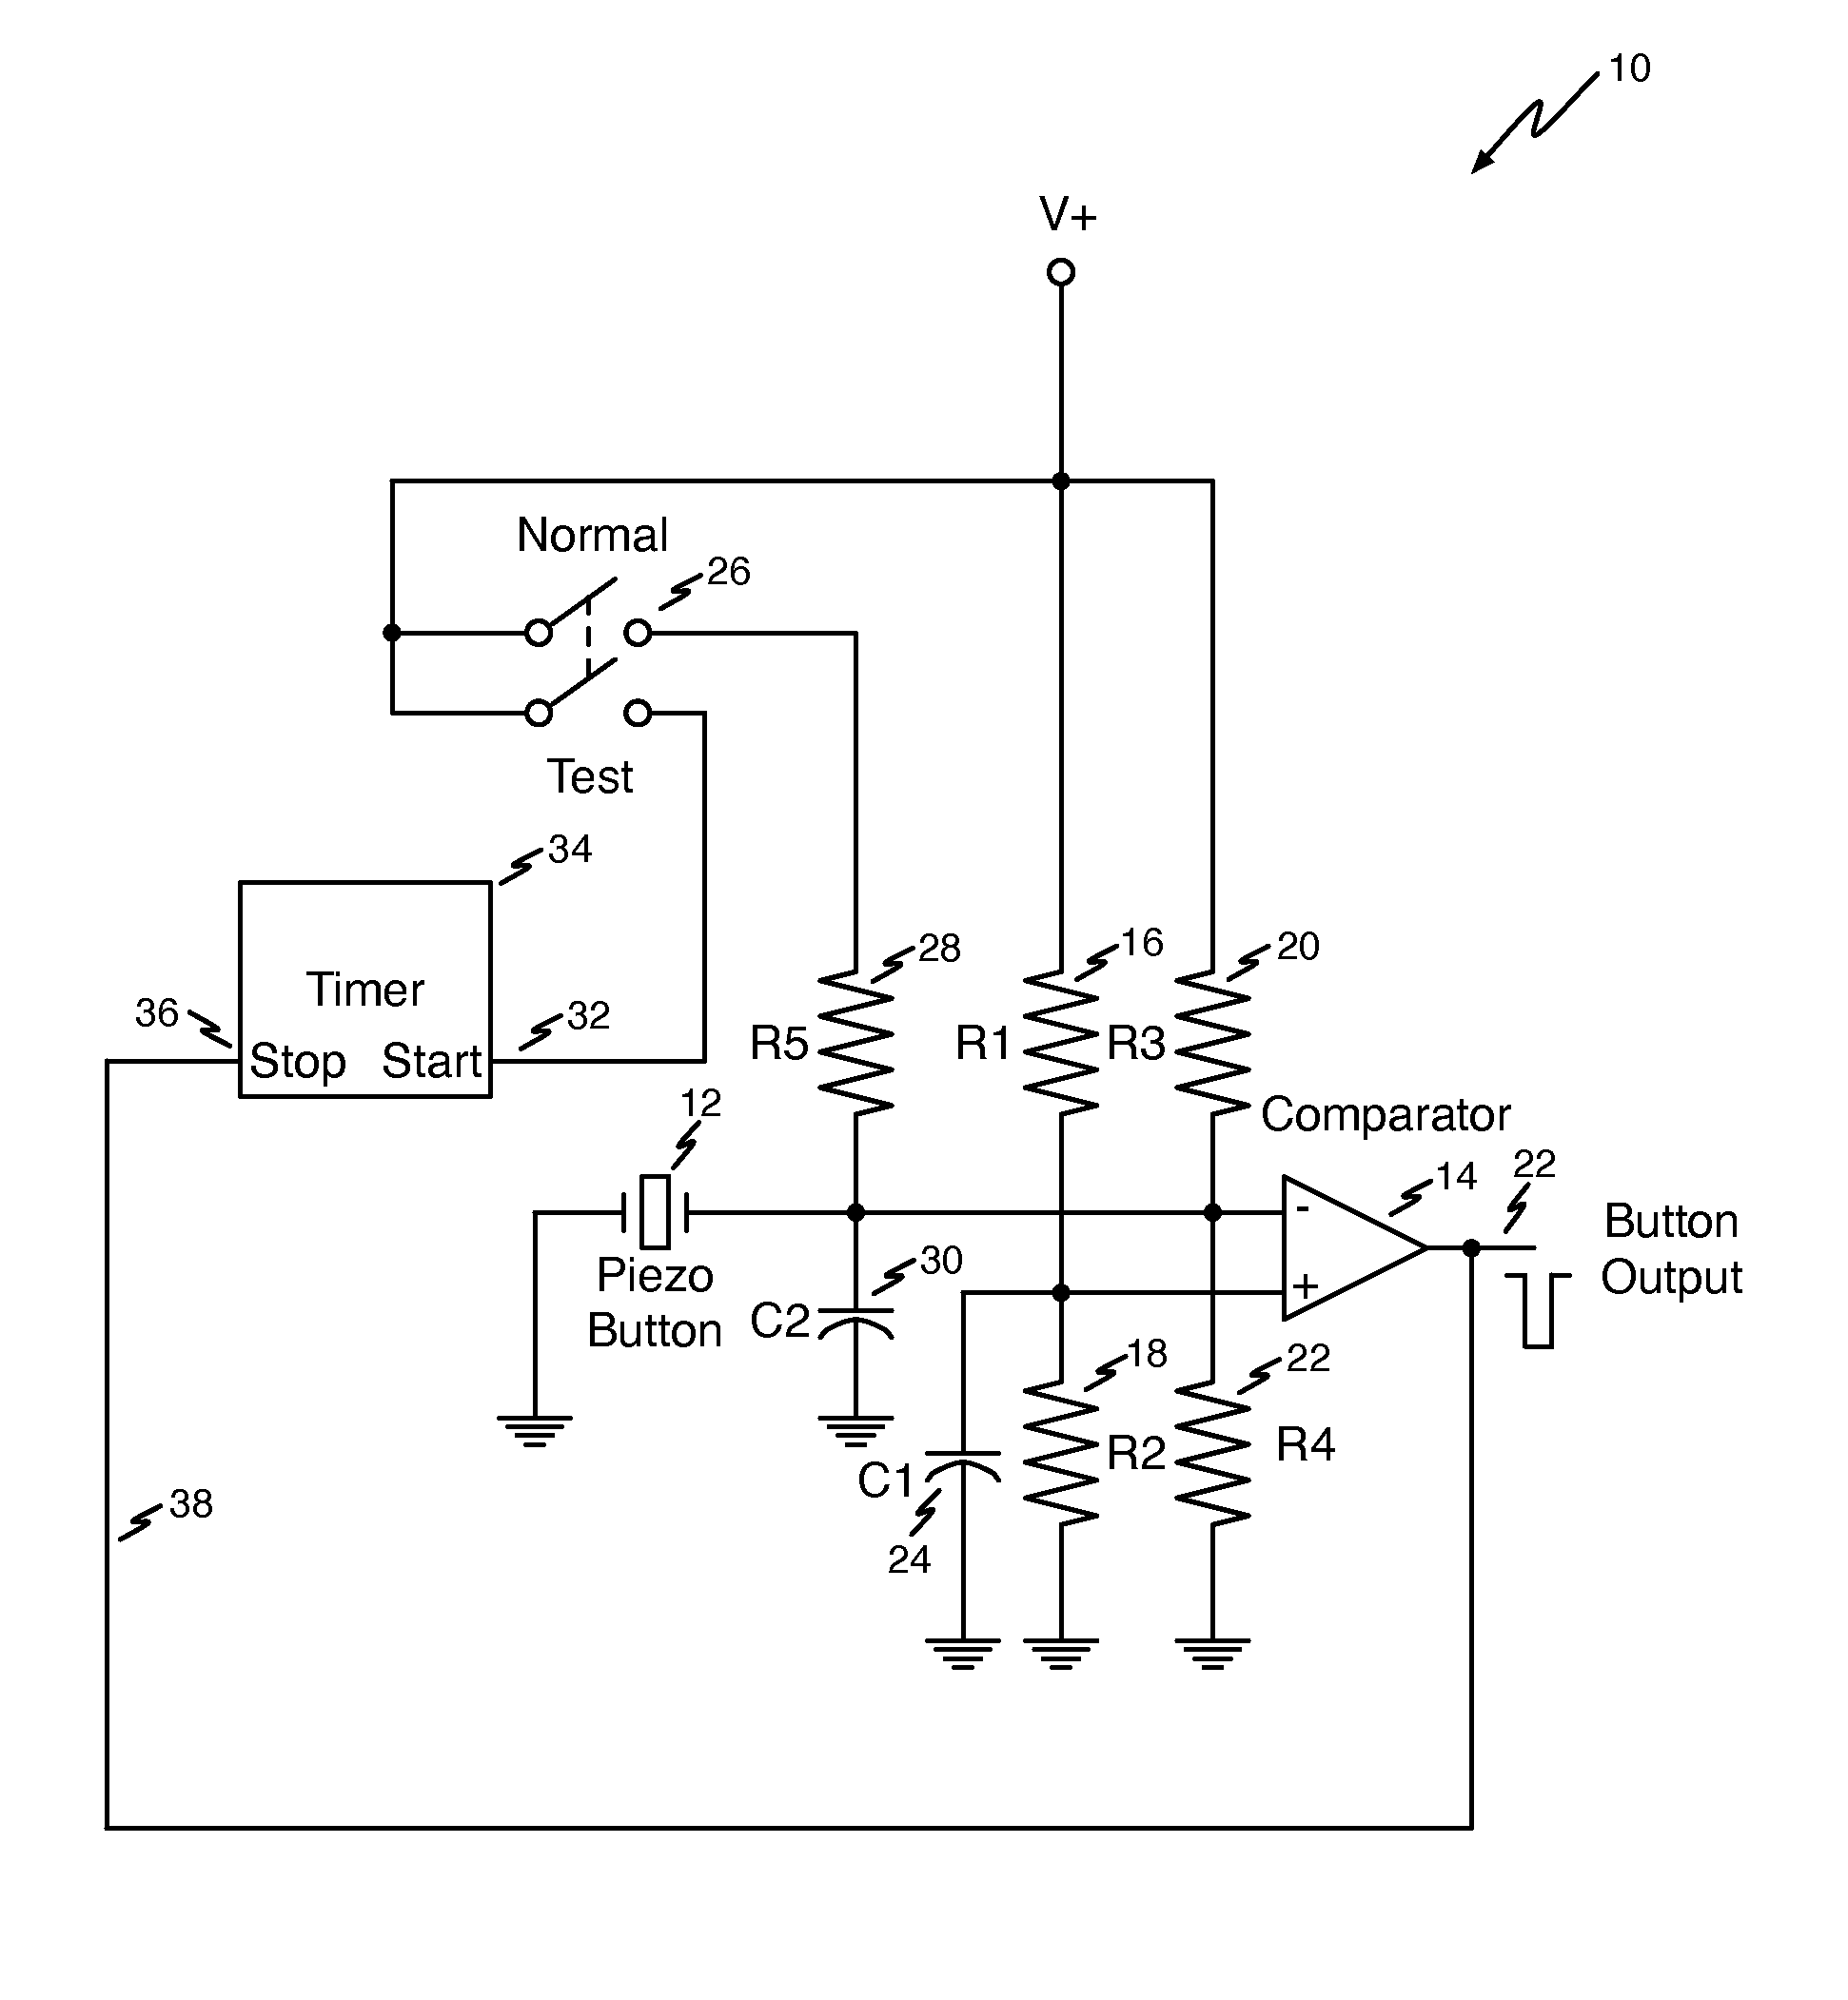 Testing a circuit assembly that contains a piezoelectric switch